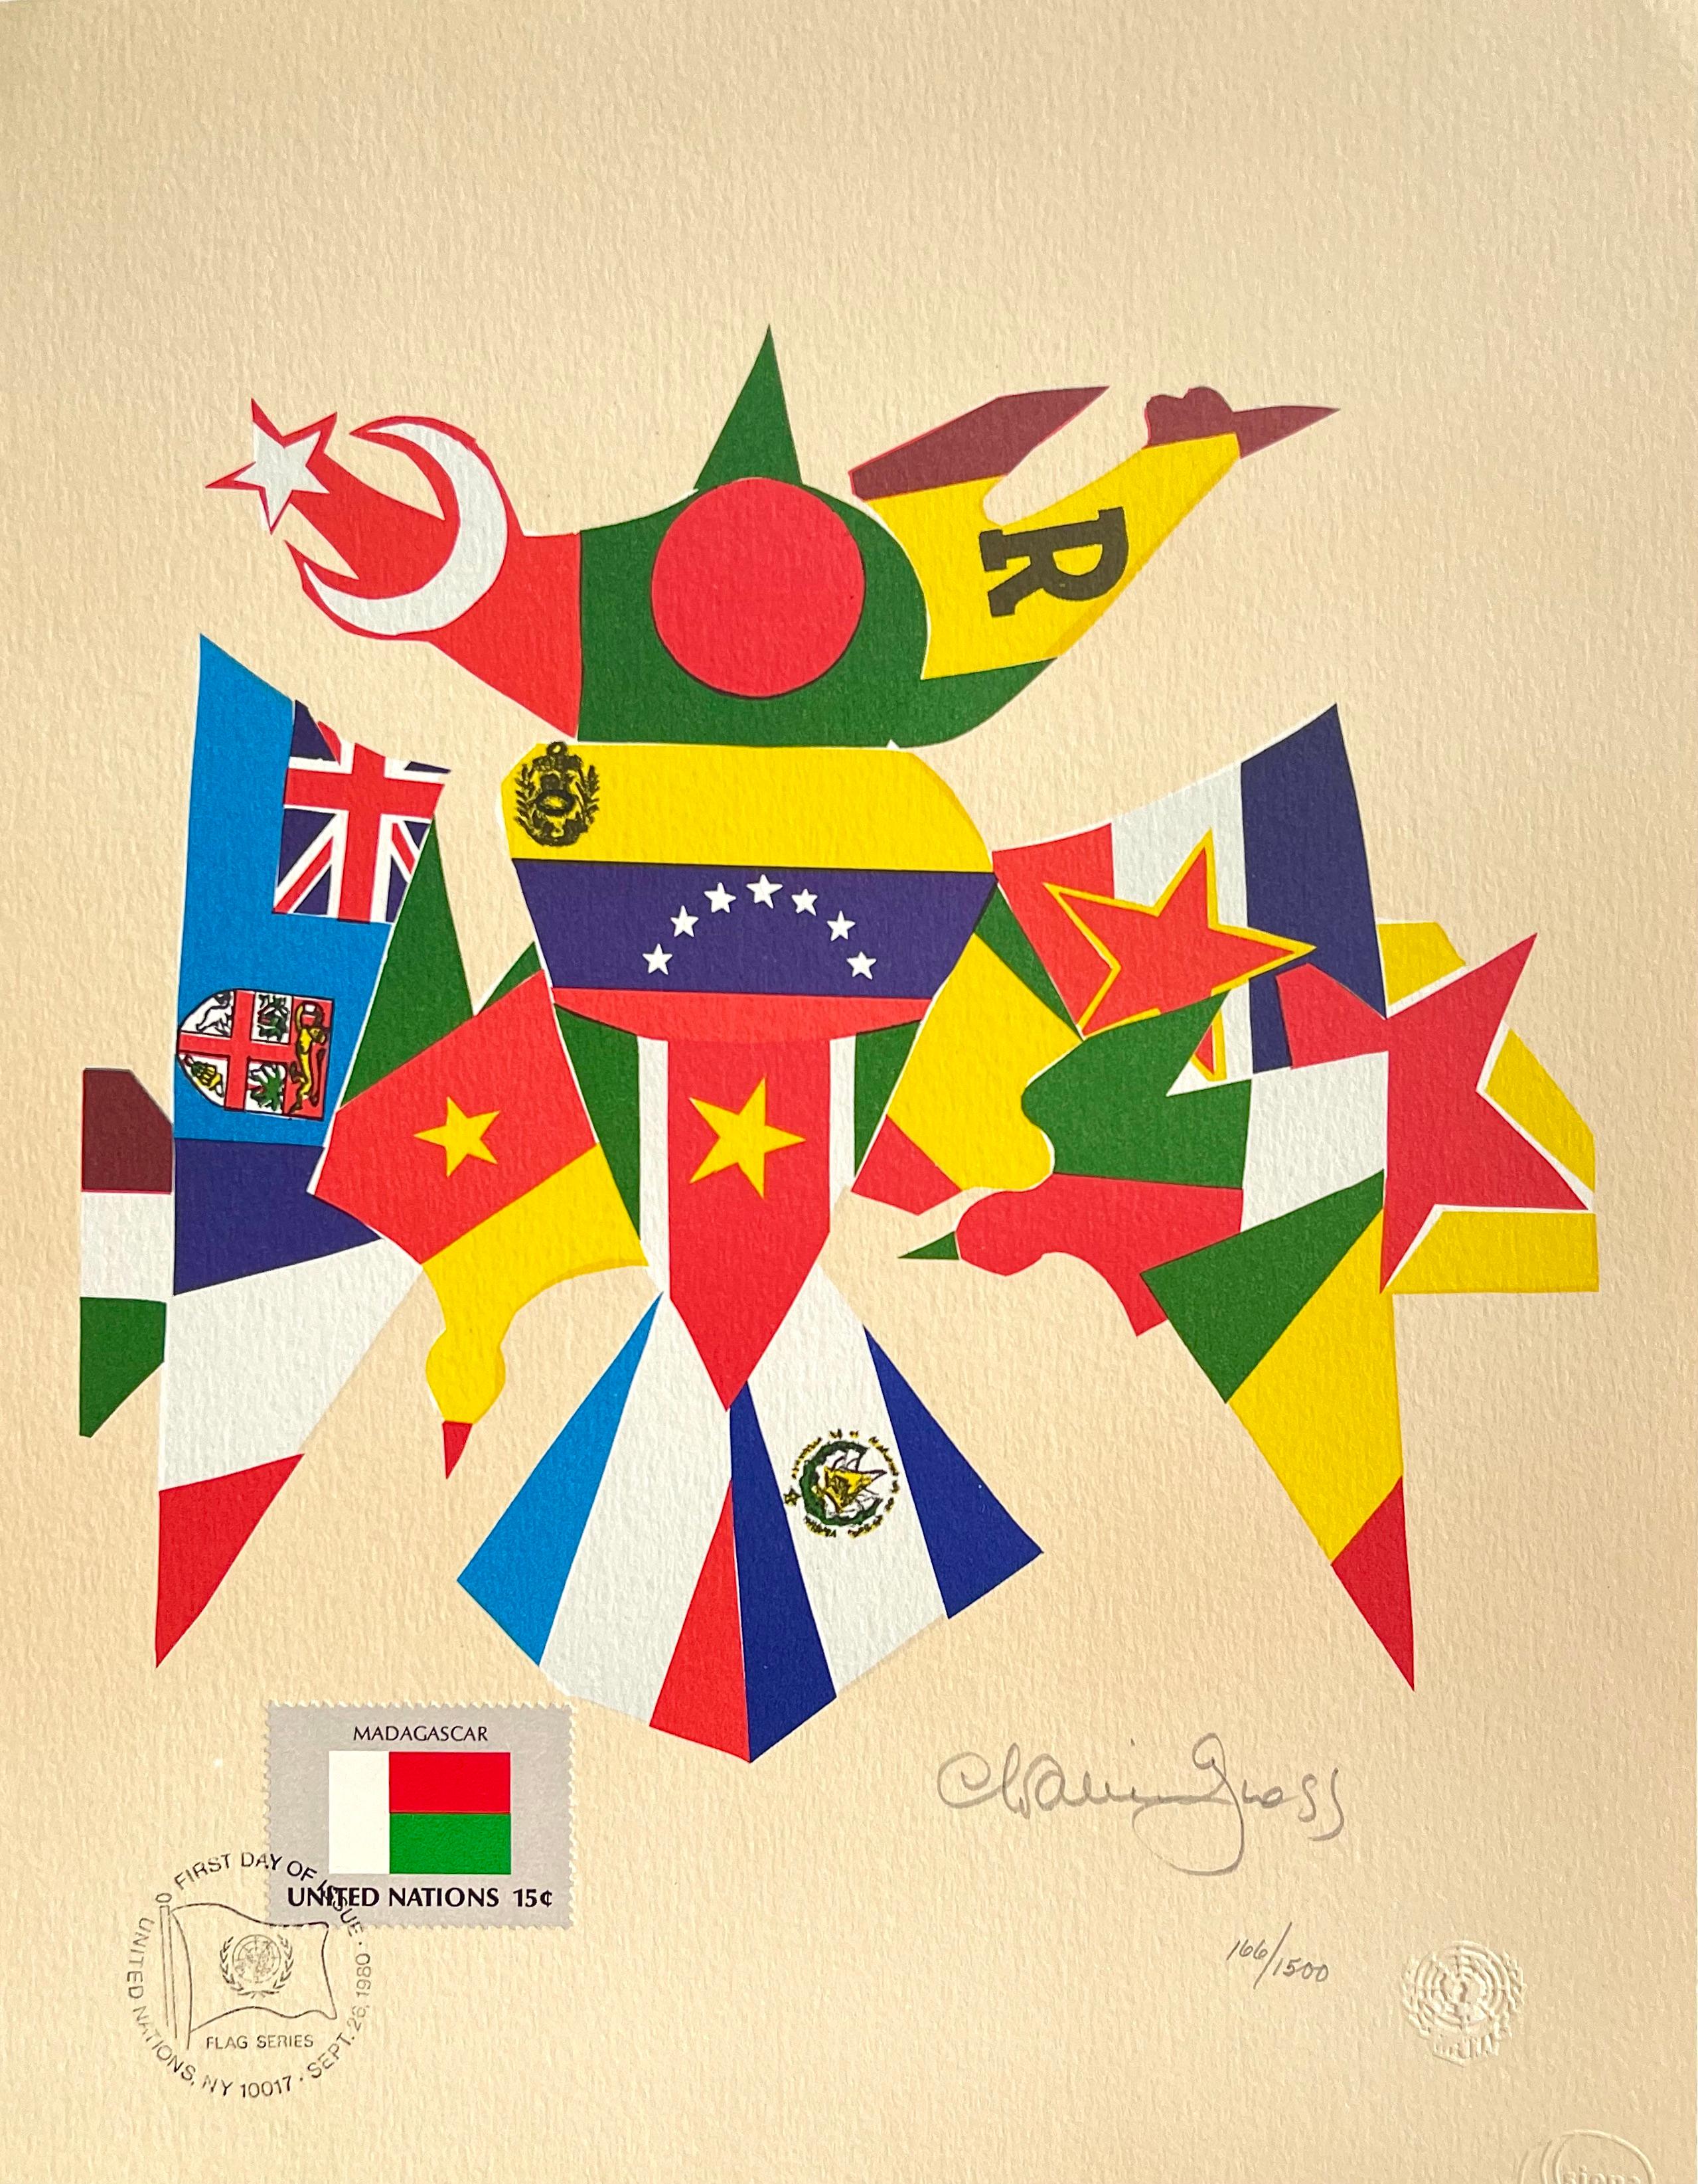 FLAG SERIES 1980 is a brightly colored lithograph by the American artist/sculptor Chaim Gross printed in 10 colors on archival Arches printmaking paper. FLAG SERIES 1980 depicts a bold graphic image comprised of colorful flag segments intermixed to